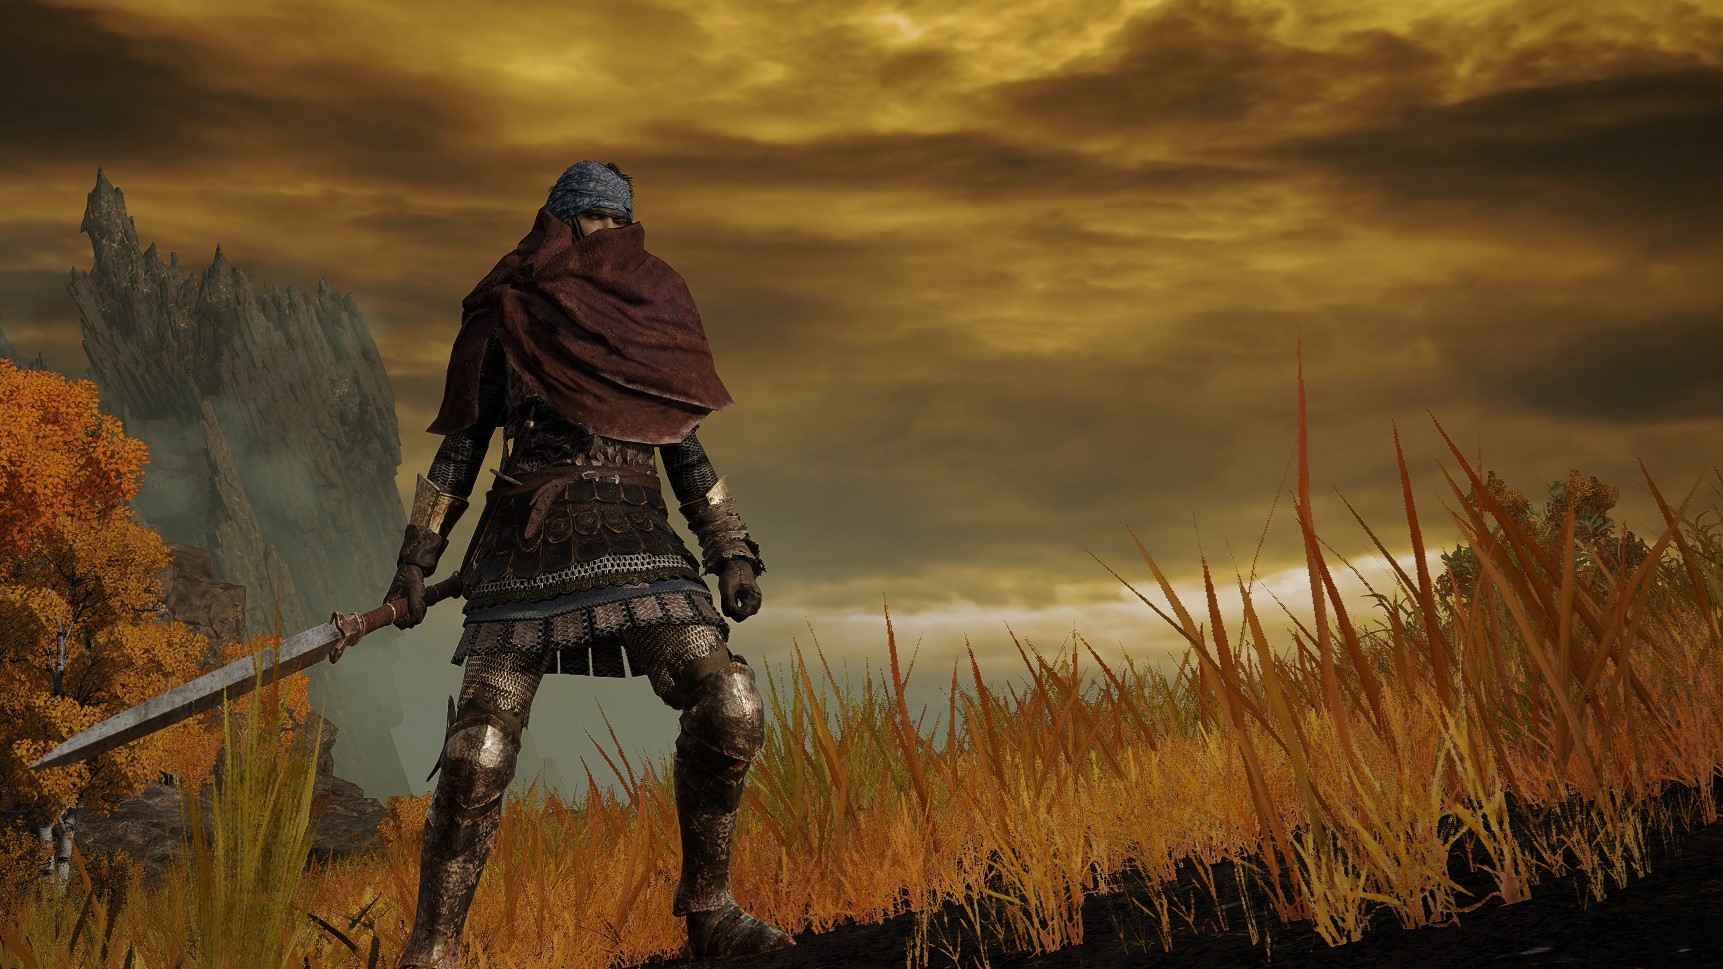 A cloaked bandit stands against an orange sky.